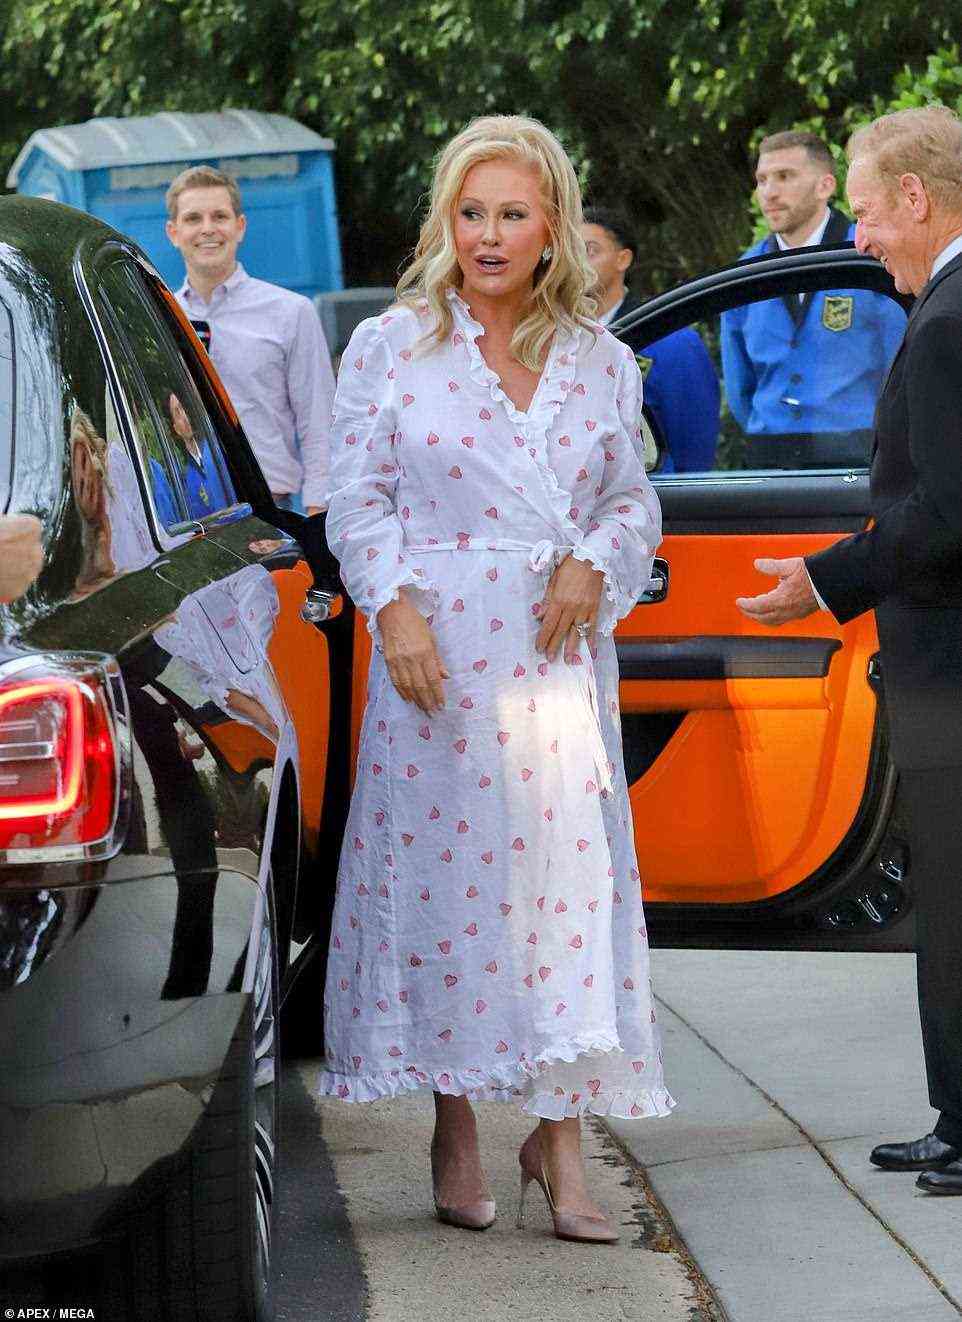 Love on the brain: Paris' mother Kathy Hilton stunned in a white heart-patterned wrap dress and a pair of blush toned heels as she was captured arriving to the Bel-Air estate ahead of Carter and Paris' nuptials